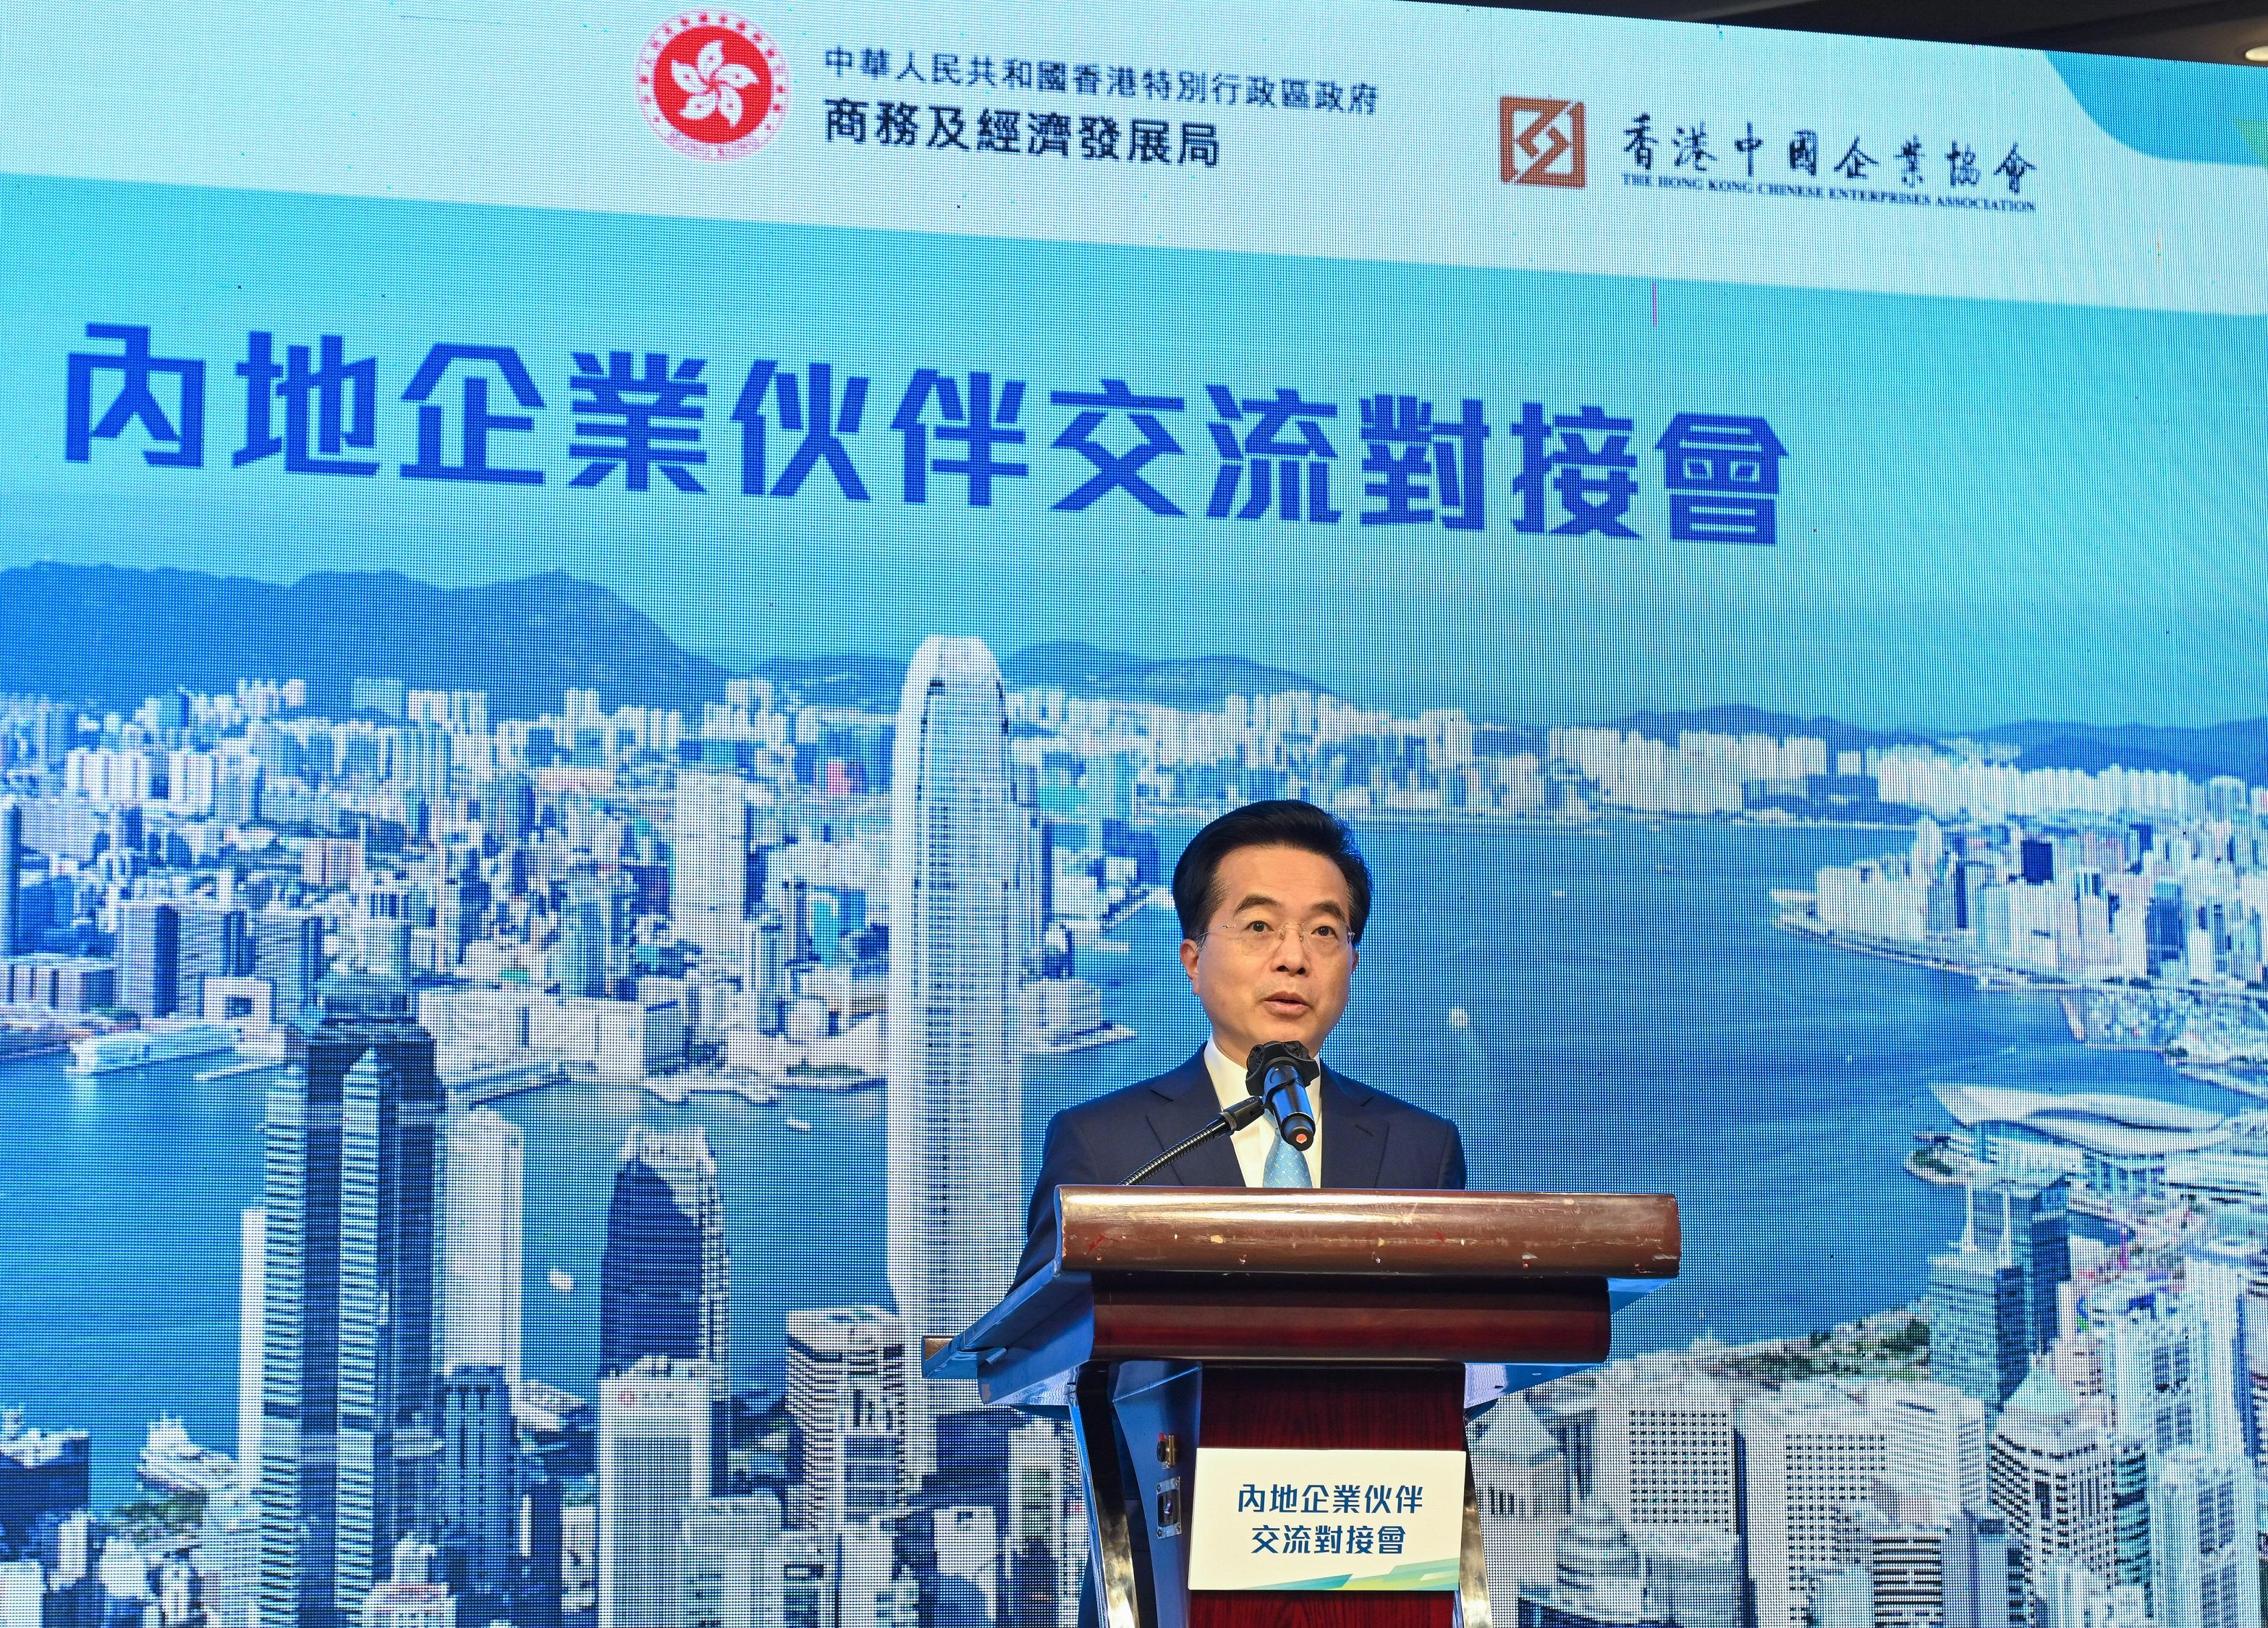 The Commerce and Economic Development Bureau in conjunction with the Hong Kong Chinese Enterprises Association (HKCEA) organised the Mainland Enterprises Partnership Exchange and Interface Session today (July 31). Photo shows the Chairman of the HKCEA, Mr Miao Jianmin, delivering a speech at the opening session.